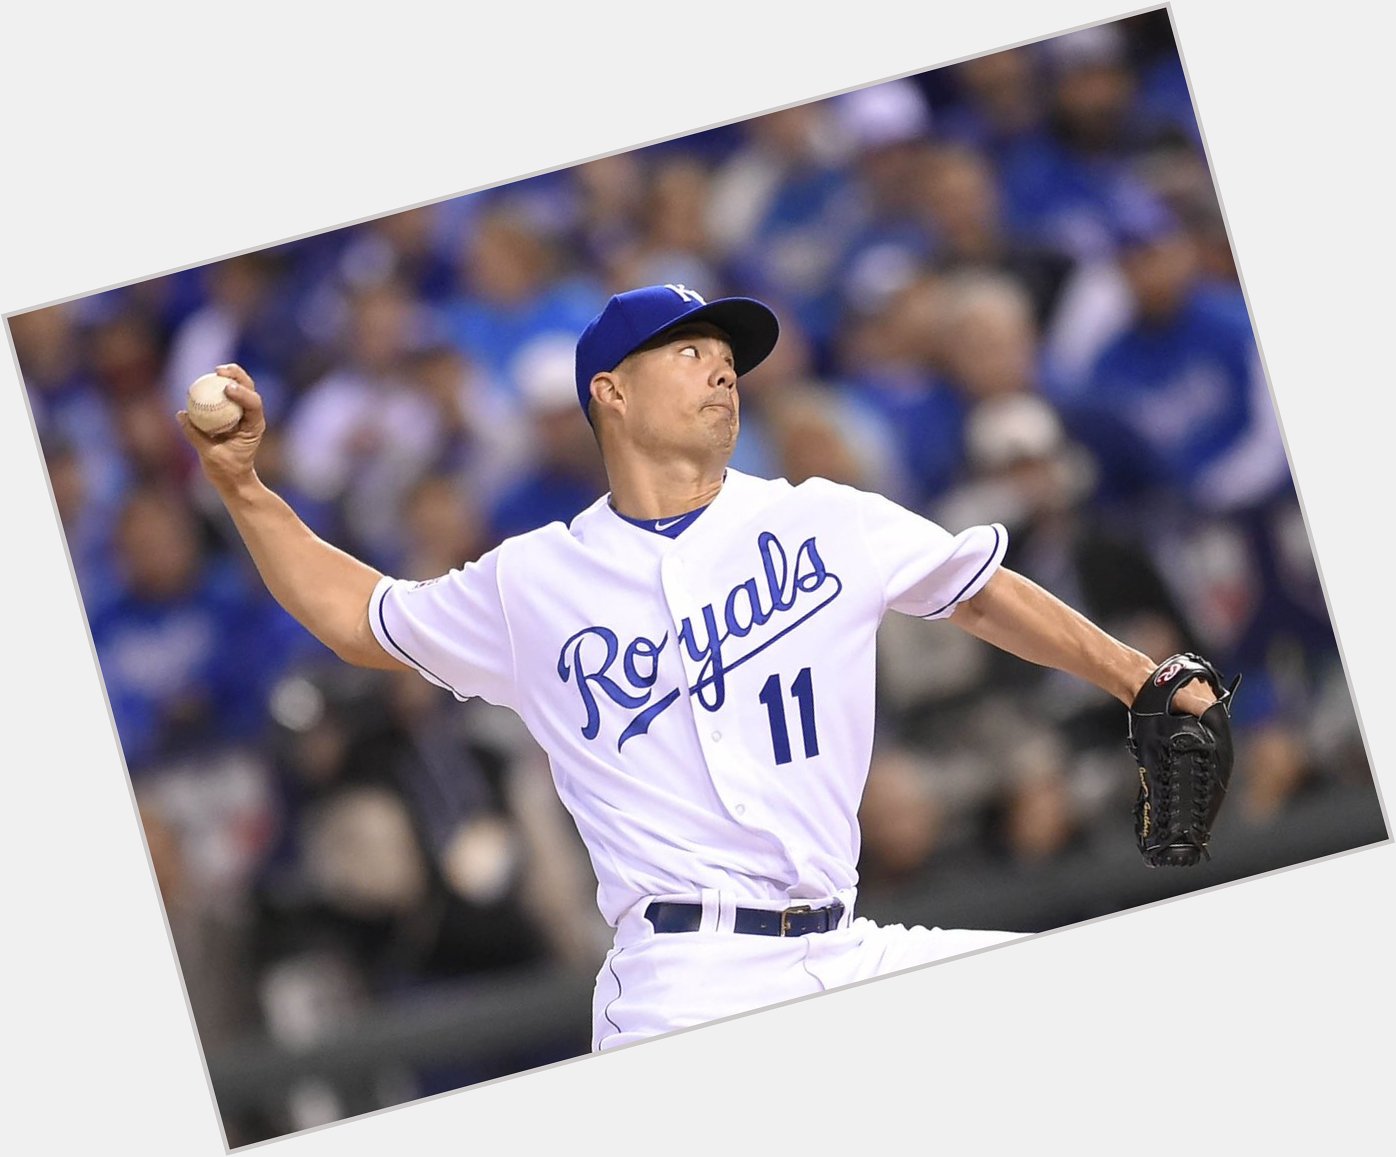 Happy birthday to Jeremy Guthrie, who pitched in the 2014 World Series for the 